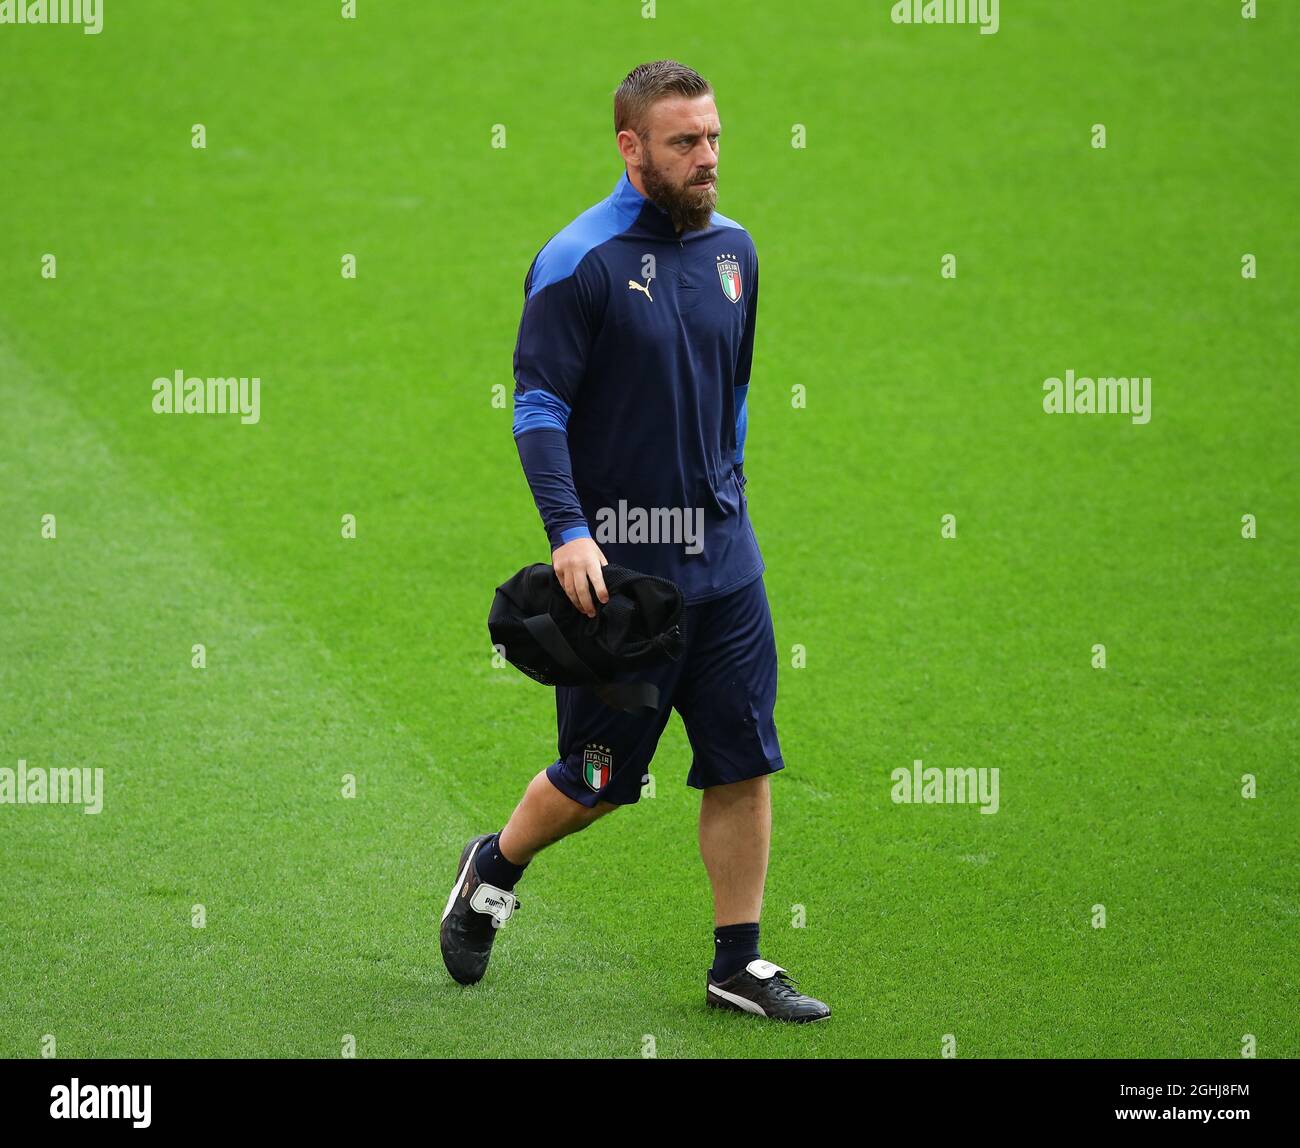 London, England, 26th June 2021. Daniele De Rossi assistant coach of the Italy team during the UEFA European Championships match at Wembley Stadium, London. Picture credit should read: David Klein / Sportimage via PA Images Stock Photo